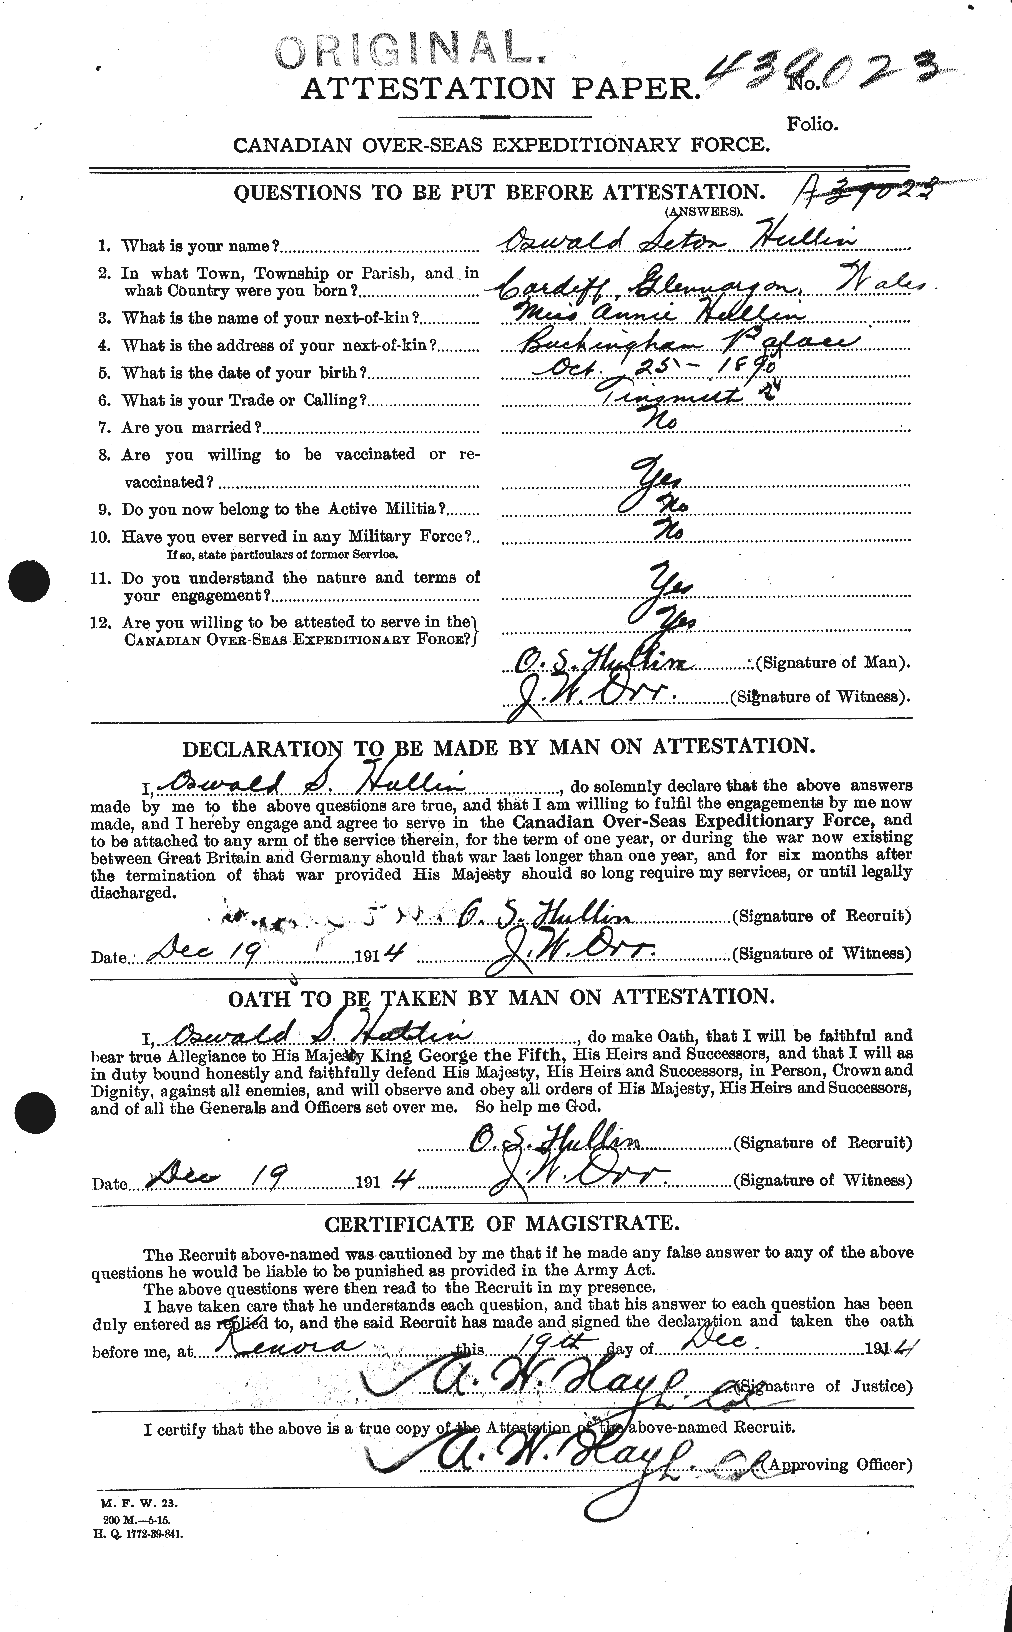 Personnel Records of the First World War - CEF 407084a